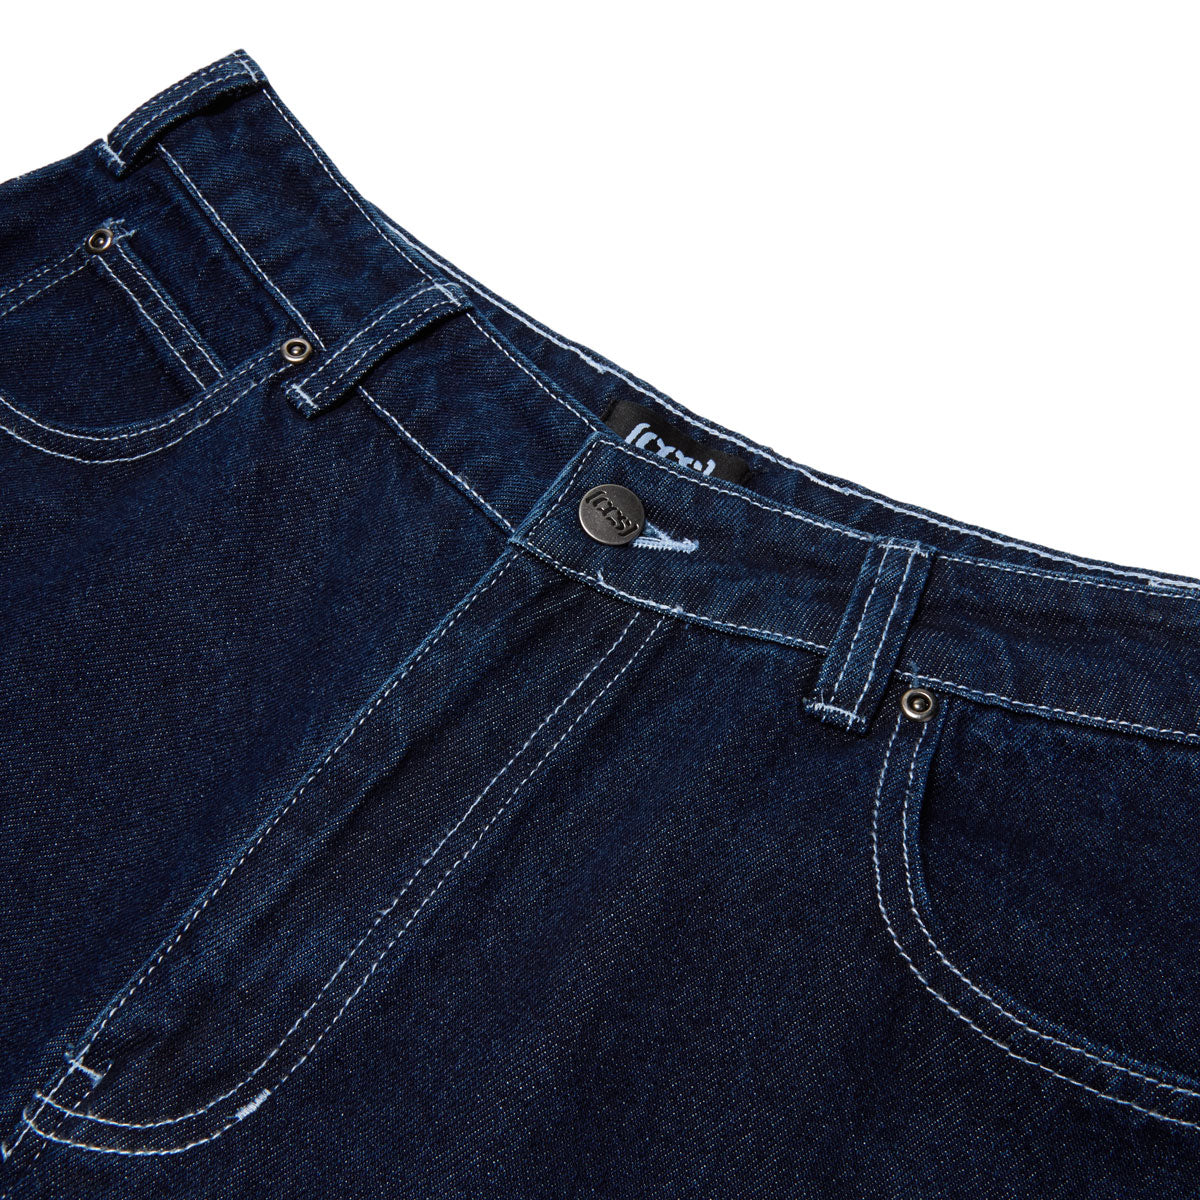 CCS Baggy Taper Denim Jeans - Overdyed Navy image 7